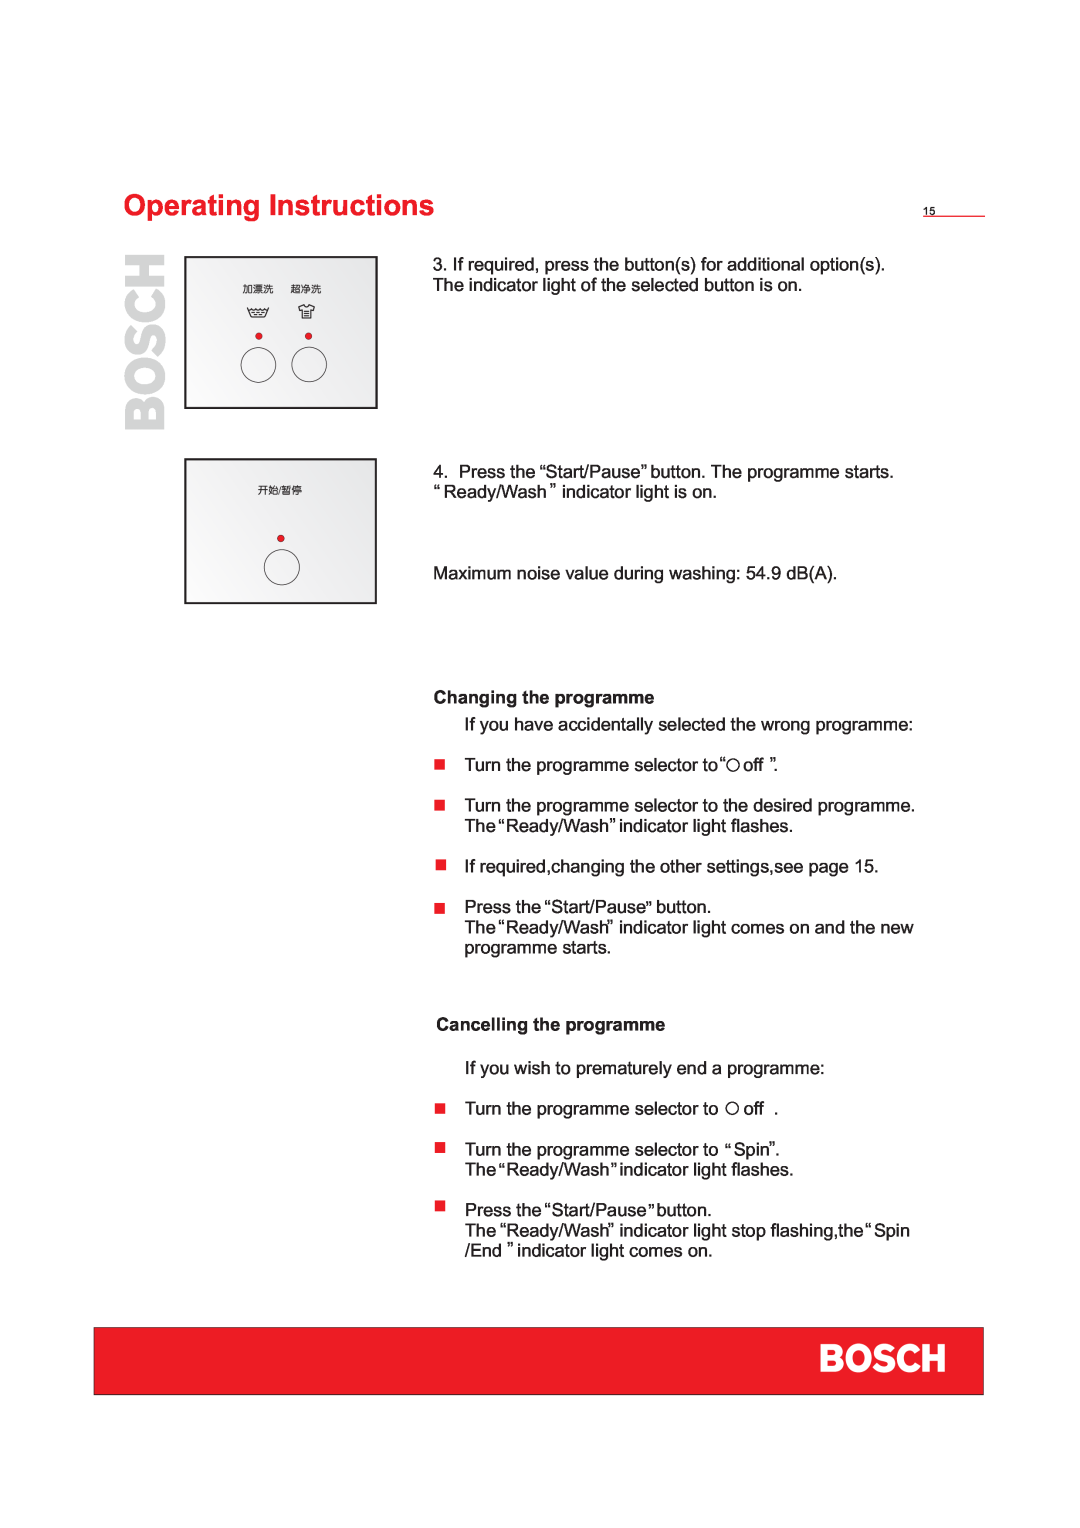 Bosch Appliances WFD50818 Operating Instructions, Changing the programme, Cancelling the programme 